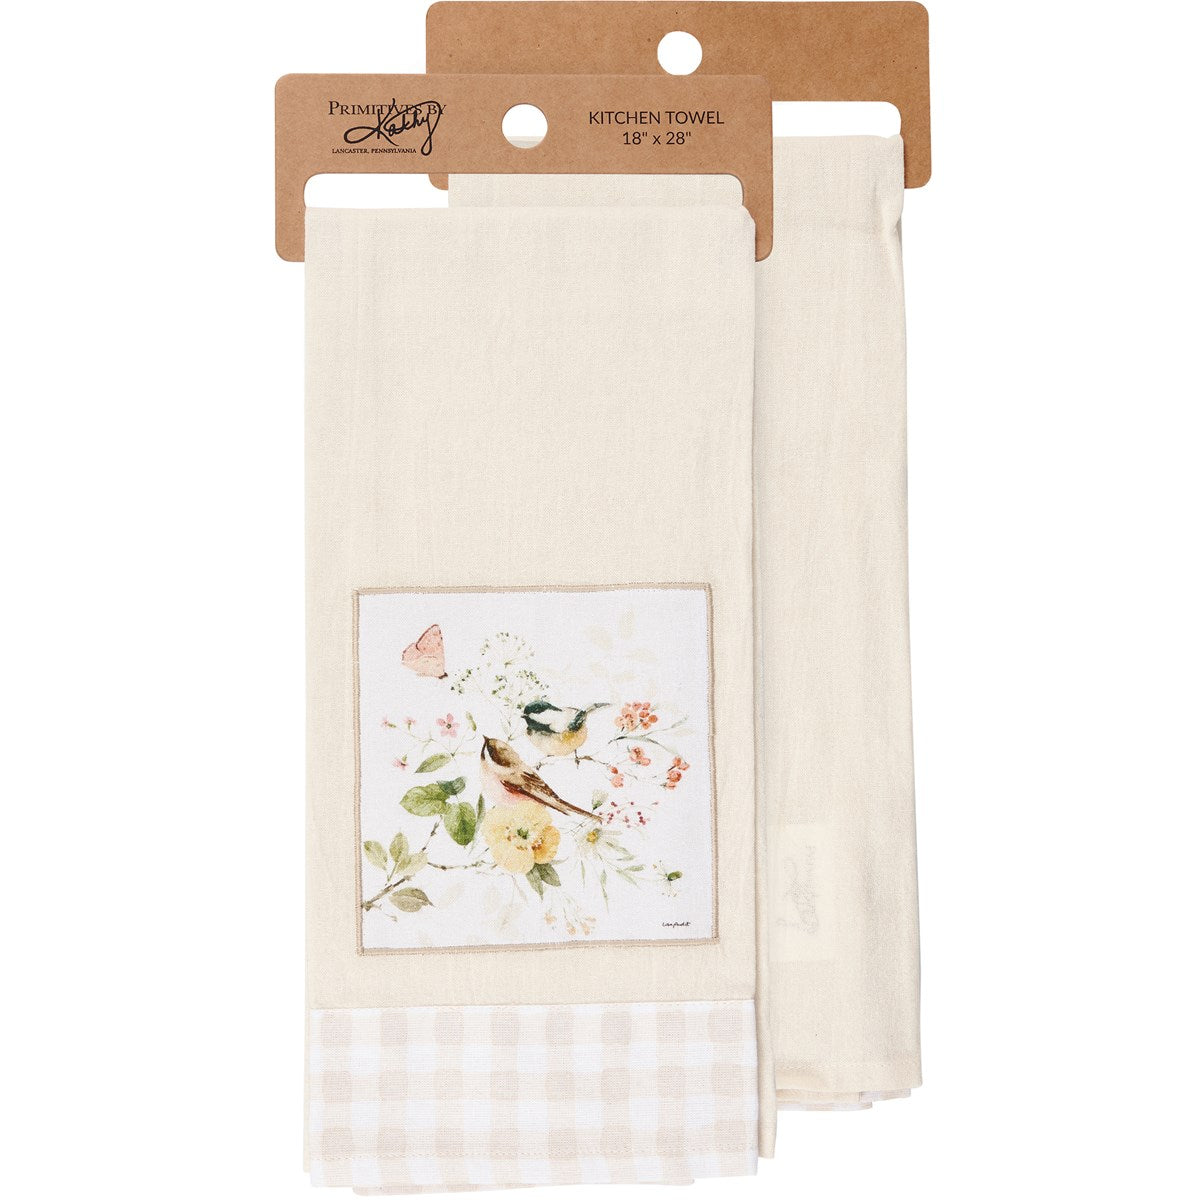 Chickadees and Blooms Kitchen Towel